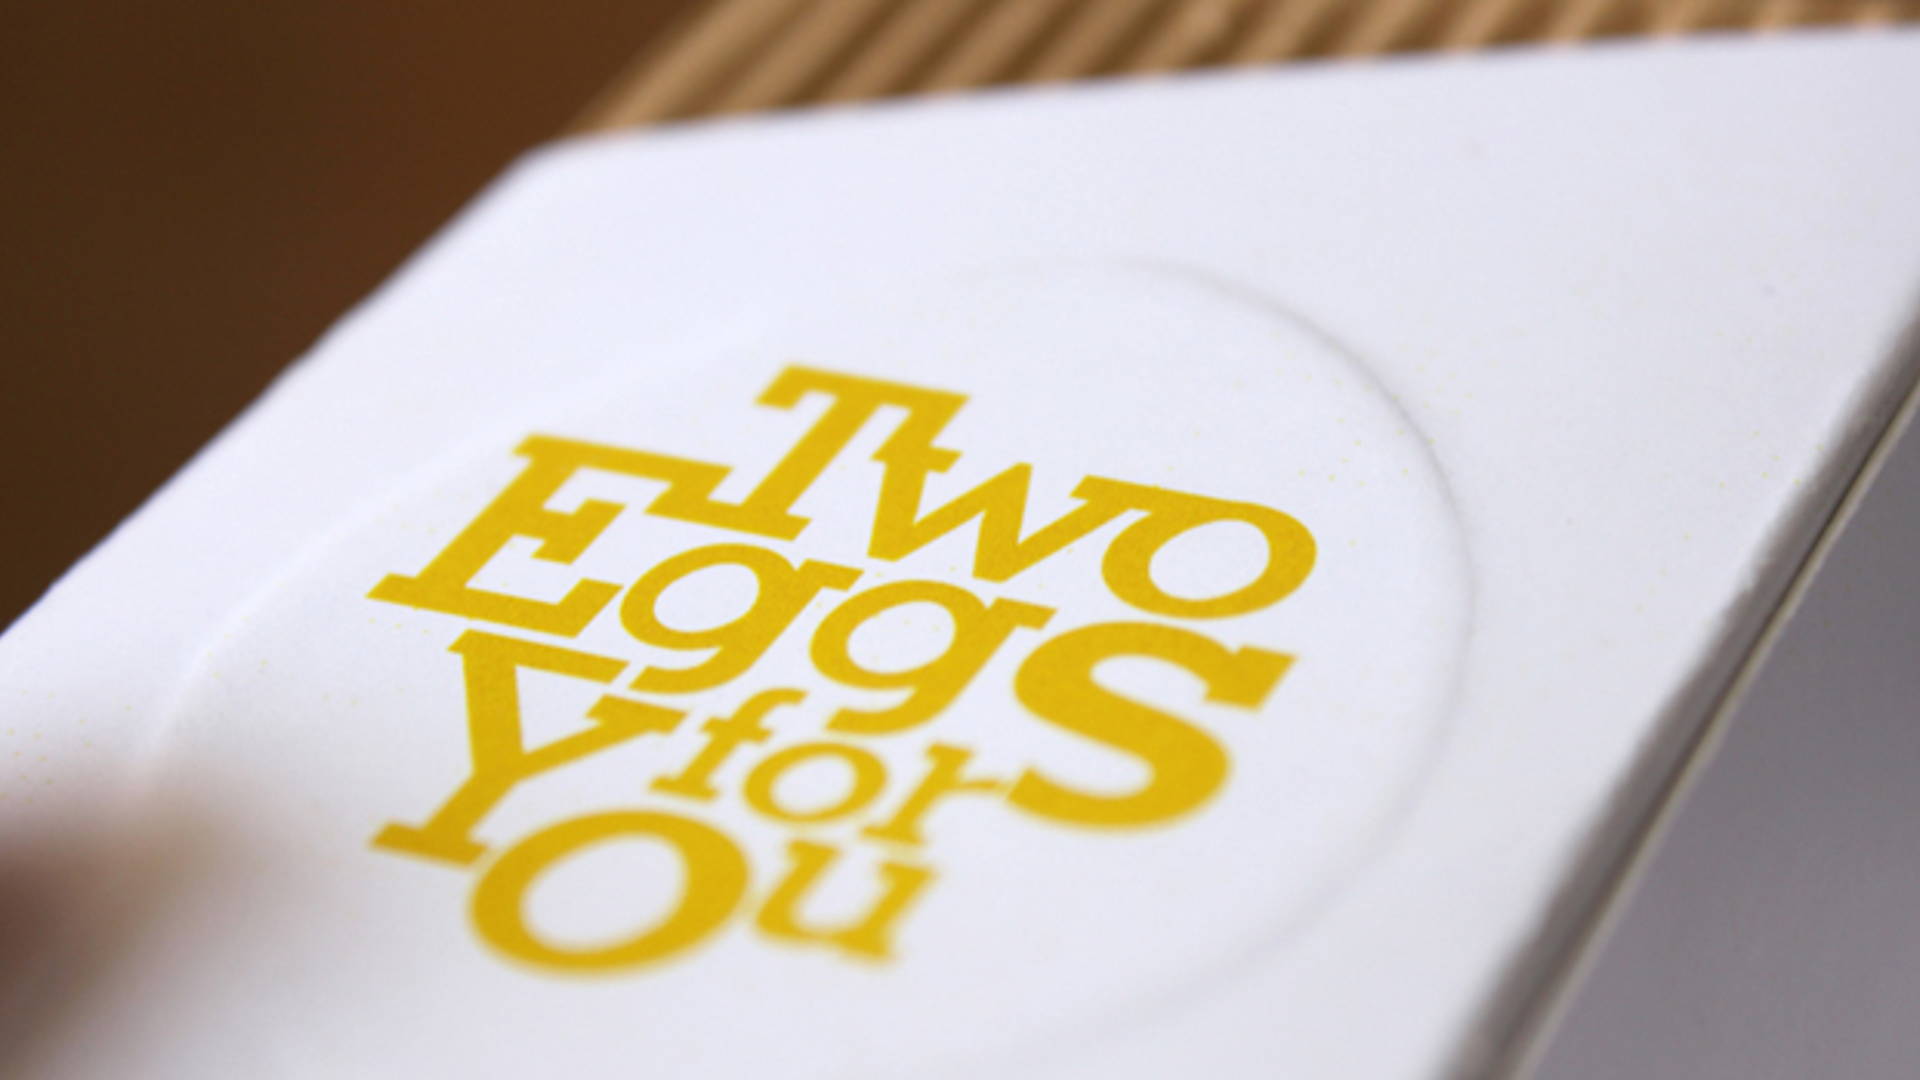 Featured image for Student Spotlight:Two Eggs for You